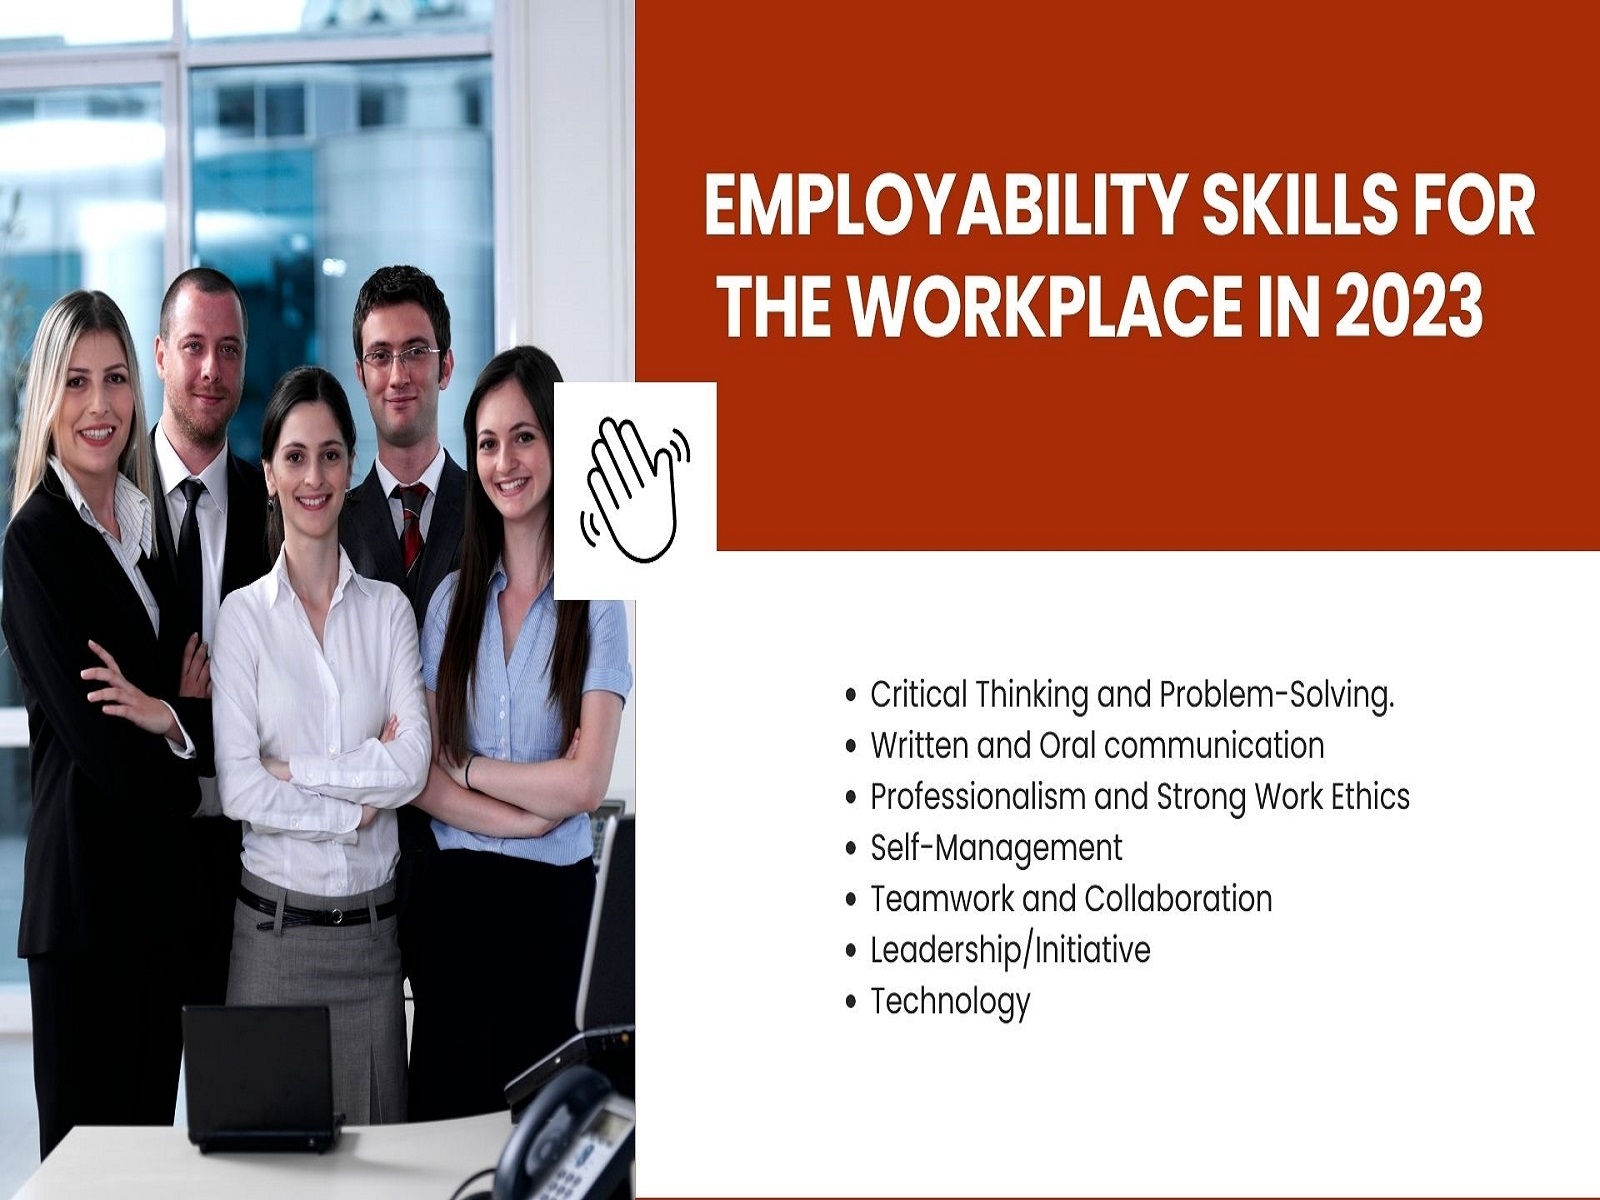 Essential Employability Skills for the Workplace by Aspiring Minds